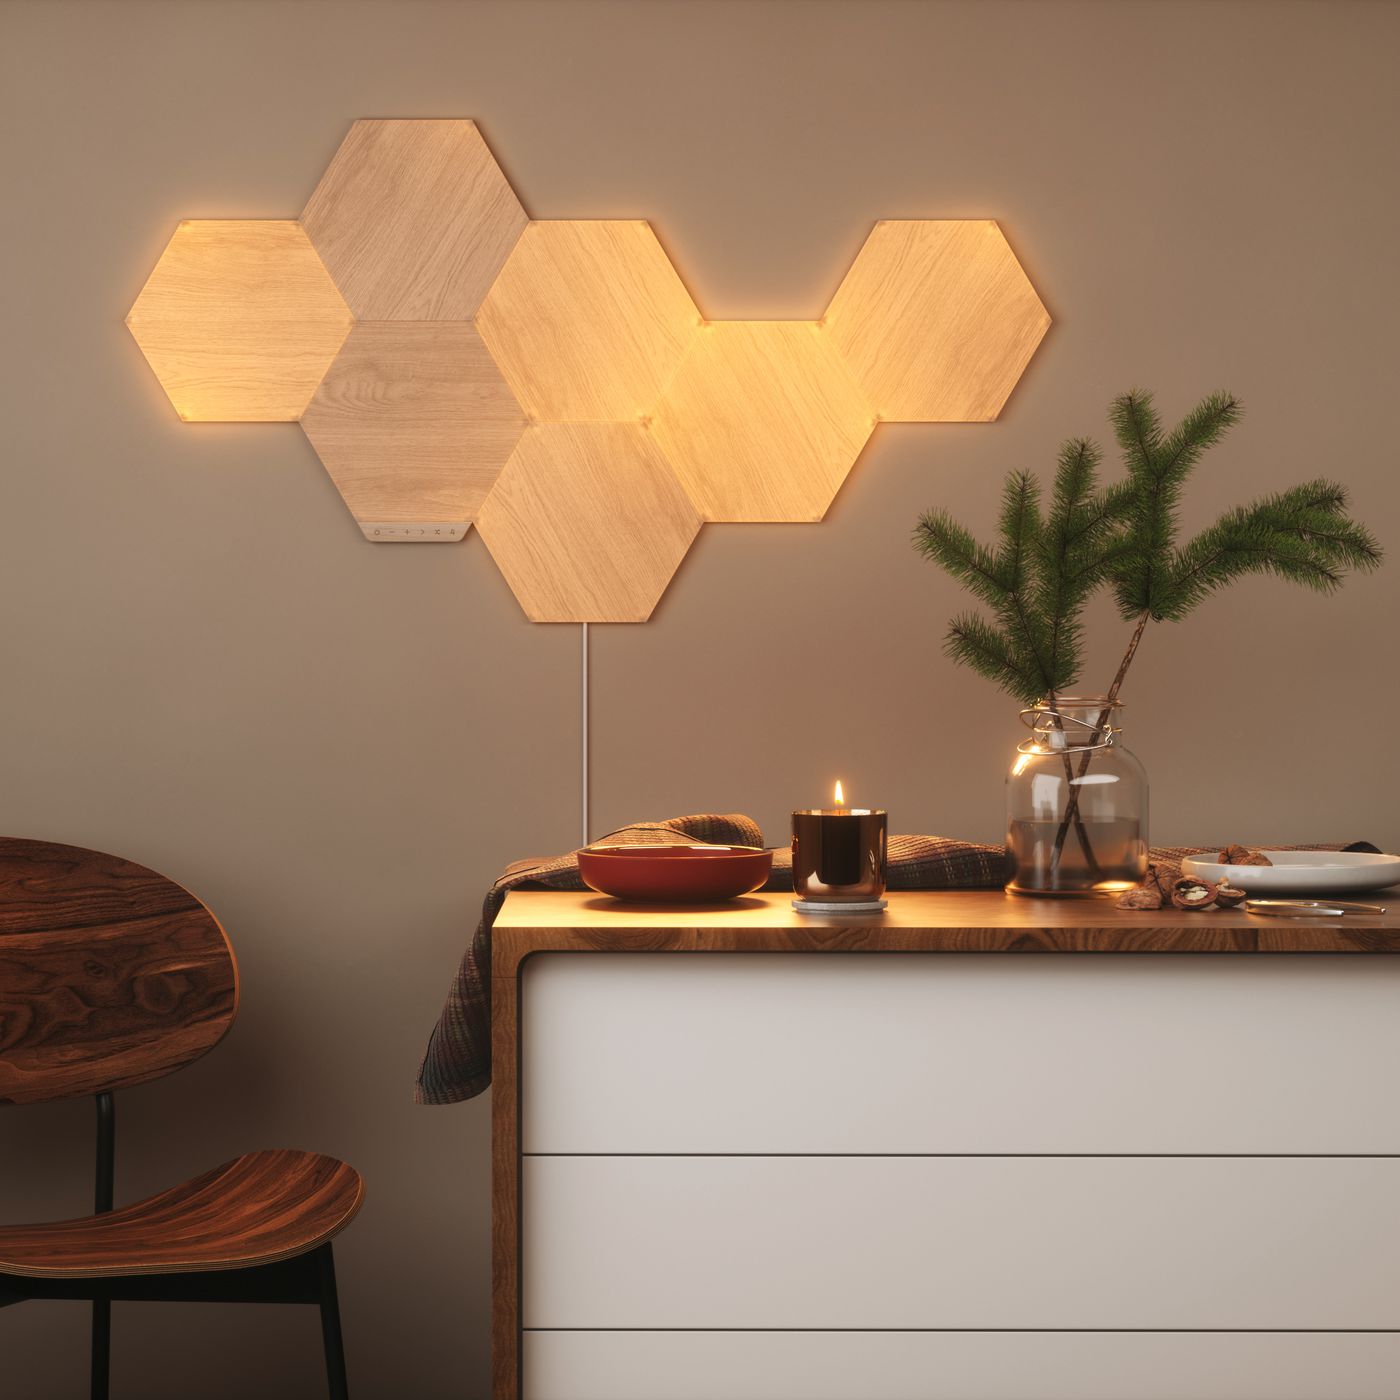 Justerbar Uartig Tage med Nanoleaf's light-up wall panels now look like wood accent pieces - The Verge